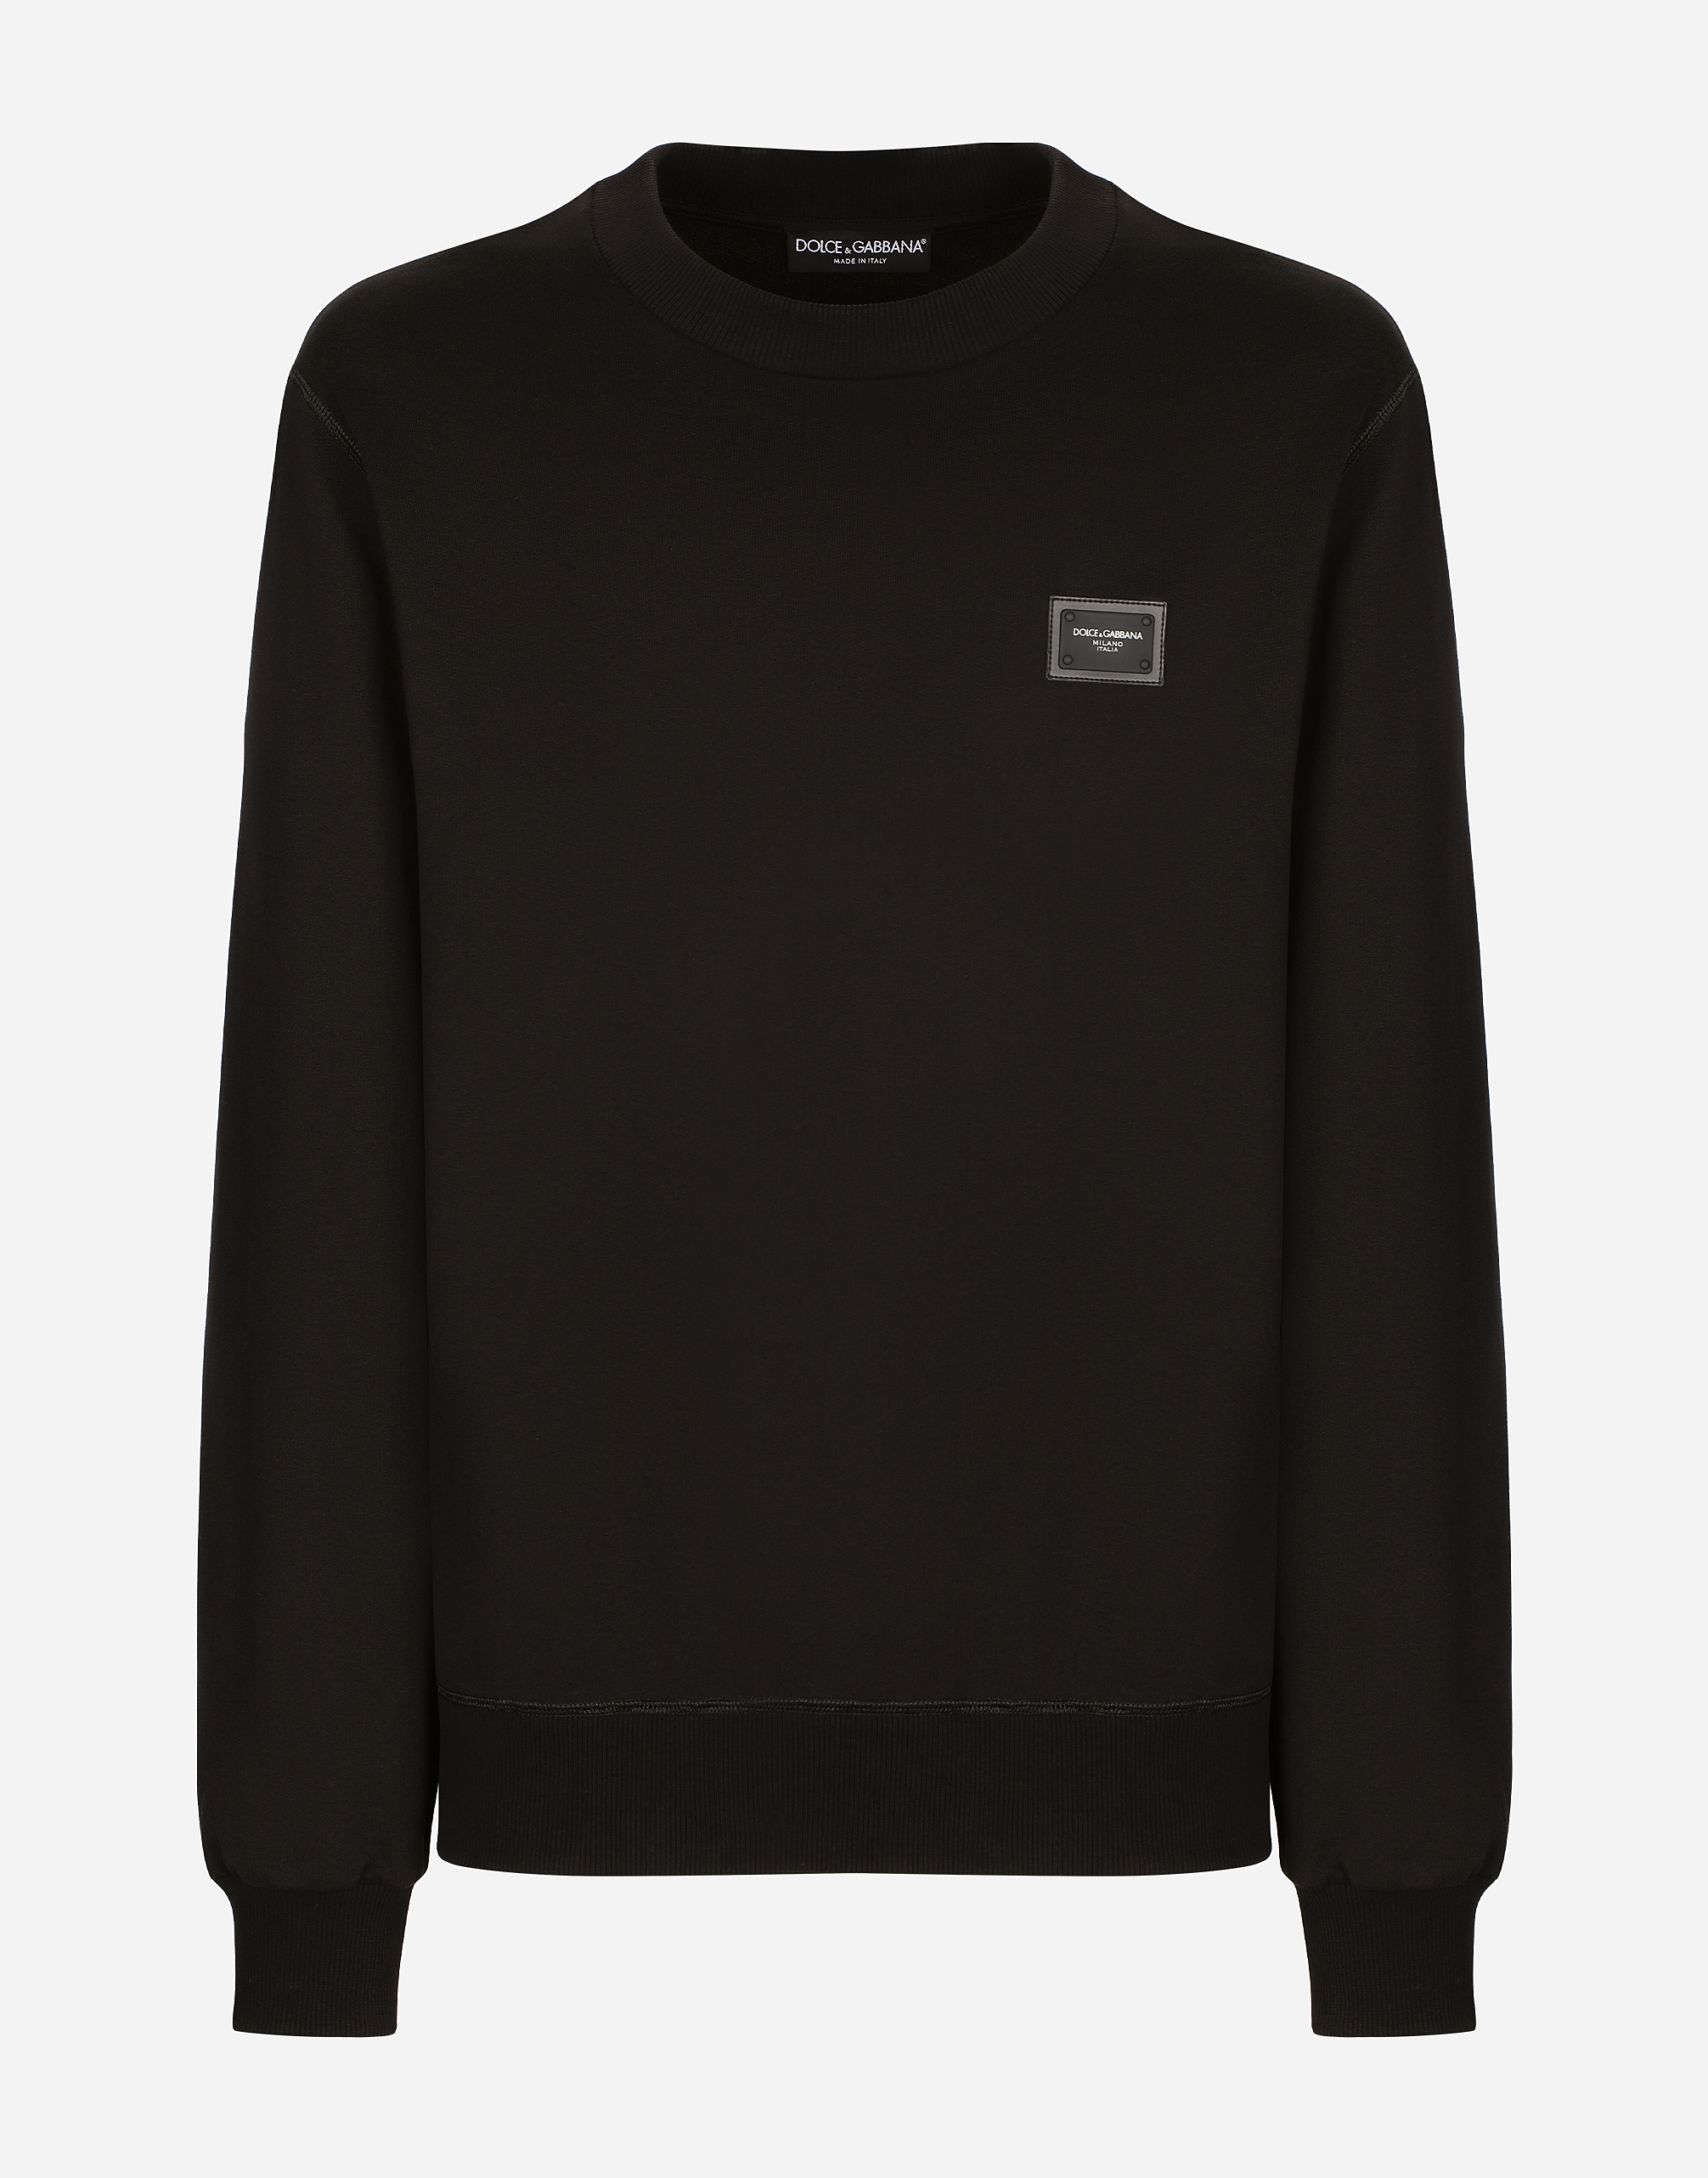 Jersey sweatshirt with branded tag in Black